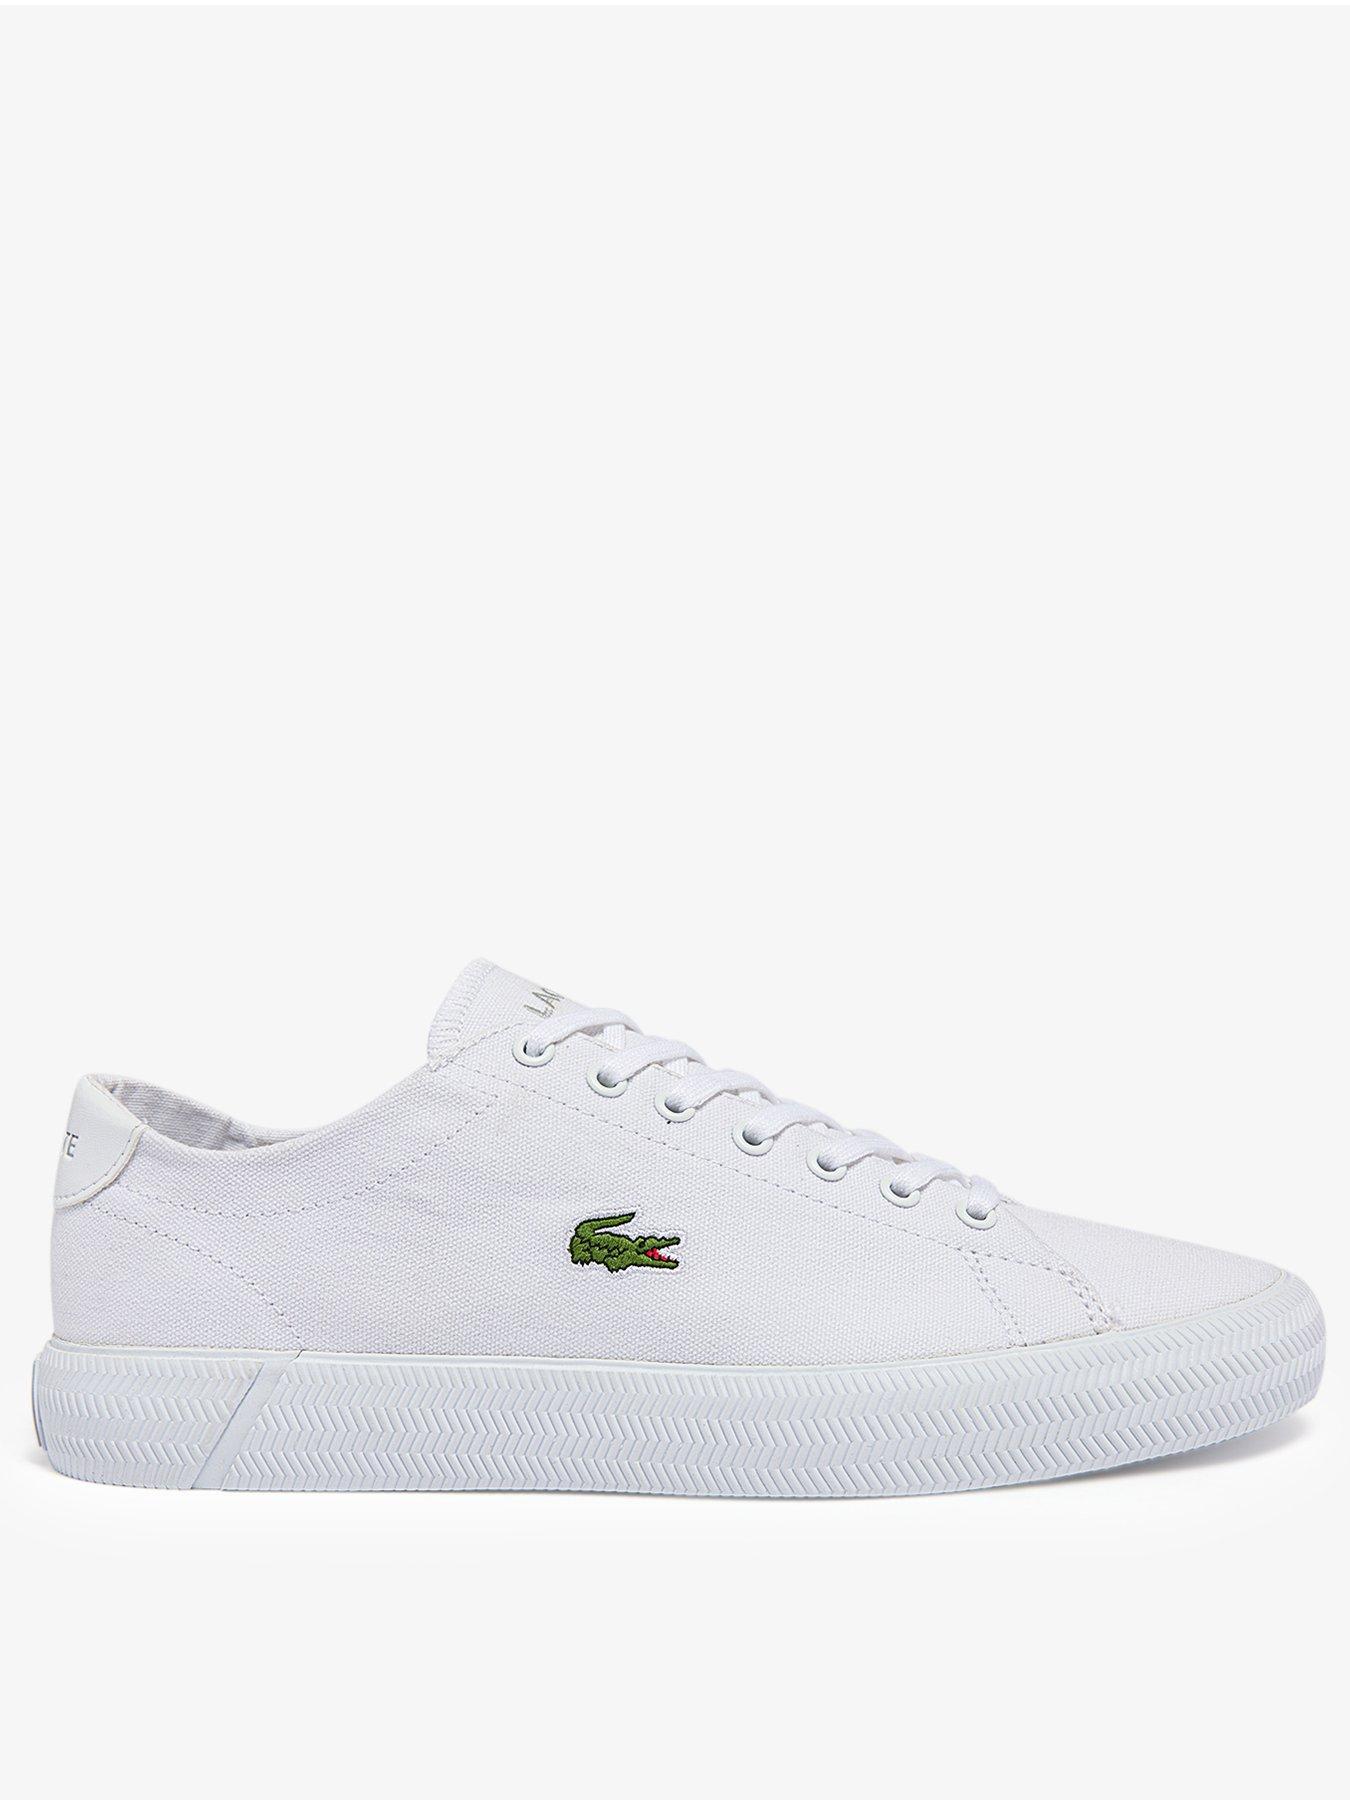 Lacoste Gripshot Bl 21 Canvas Trainer - White | very.co.uk